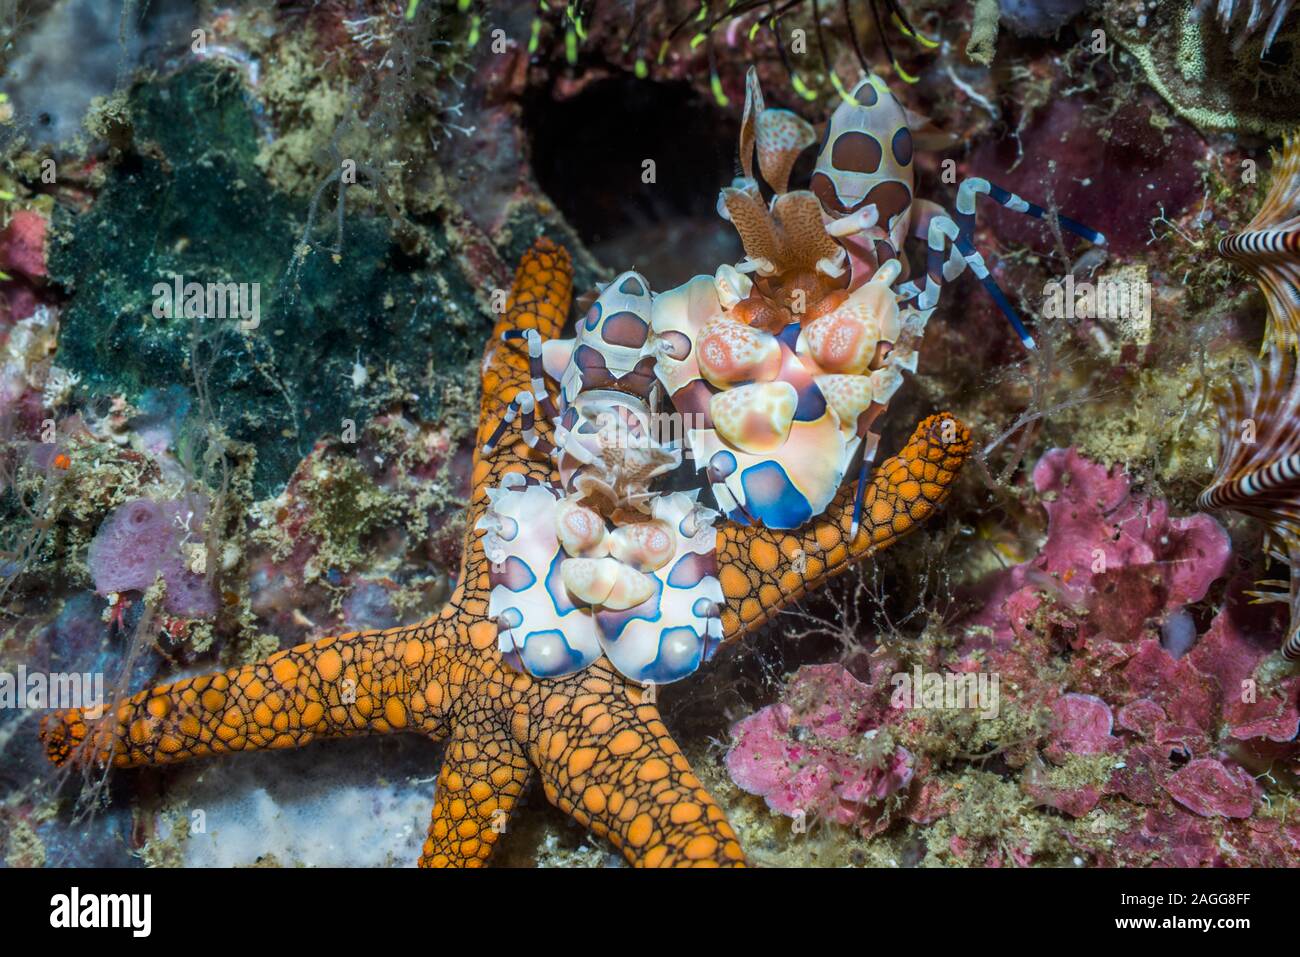 Harlequin Shrimp [Hymenocera elegans] pair with an Indian Starfish [Fromia indica] prey.  West Papua, Indonesia.  Indo-West Pacific. Stock Photo